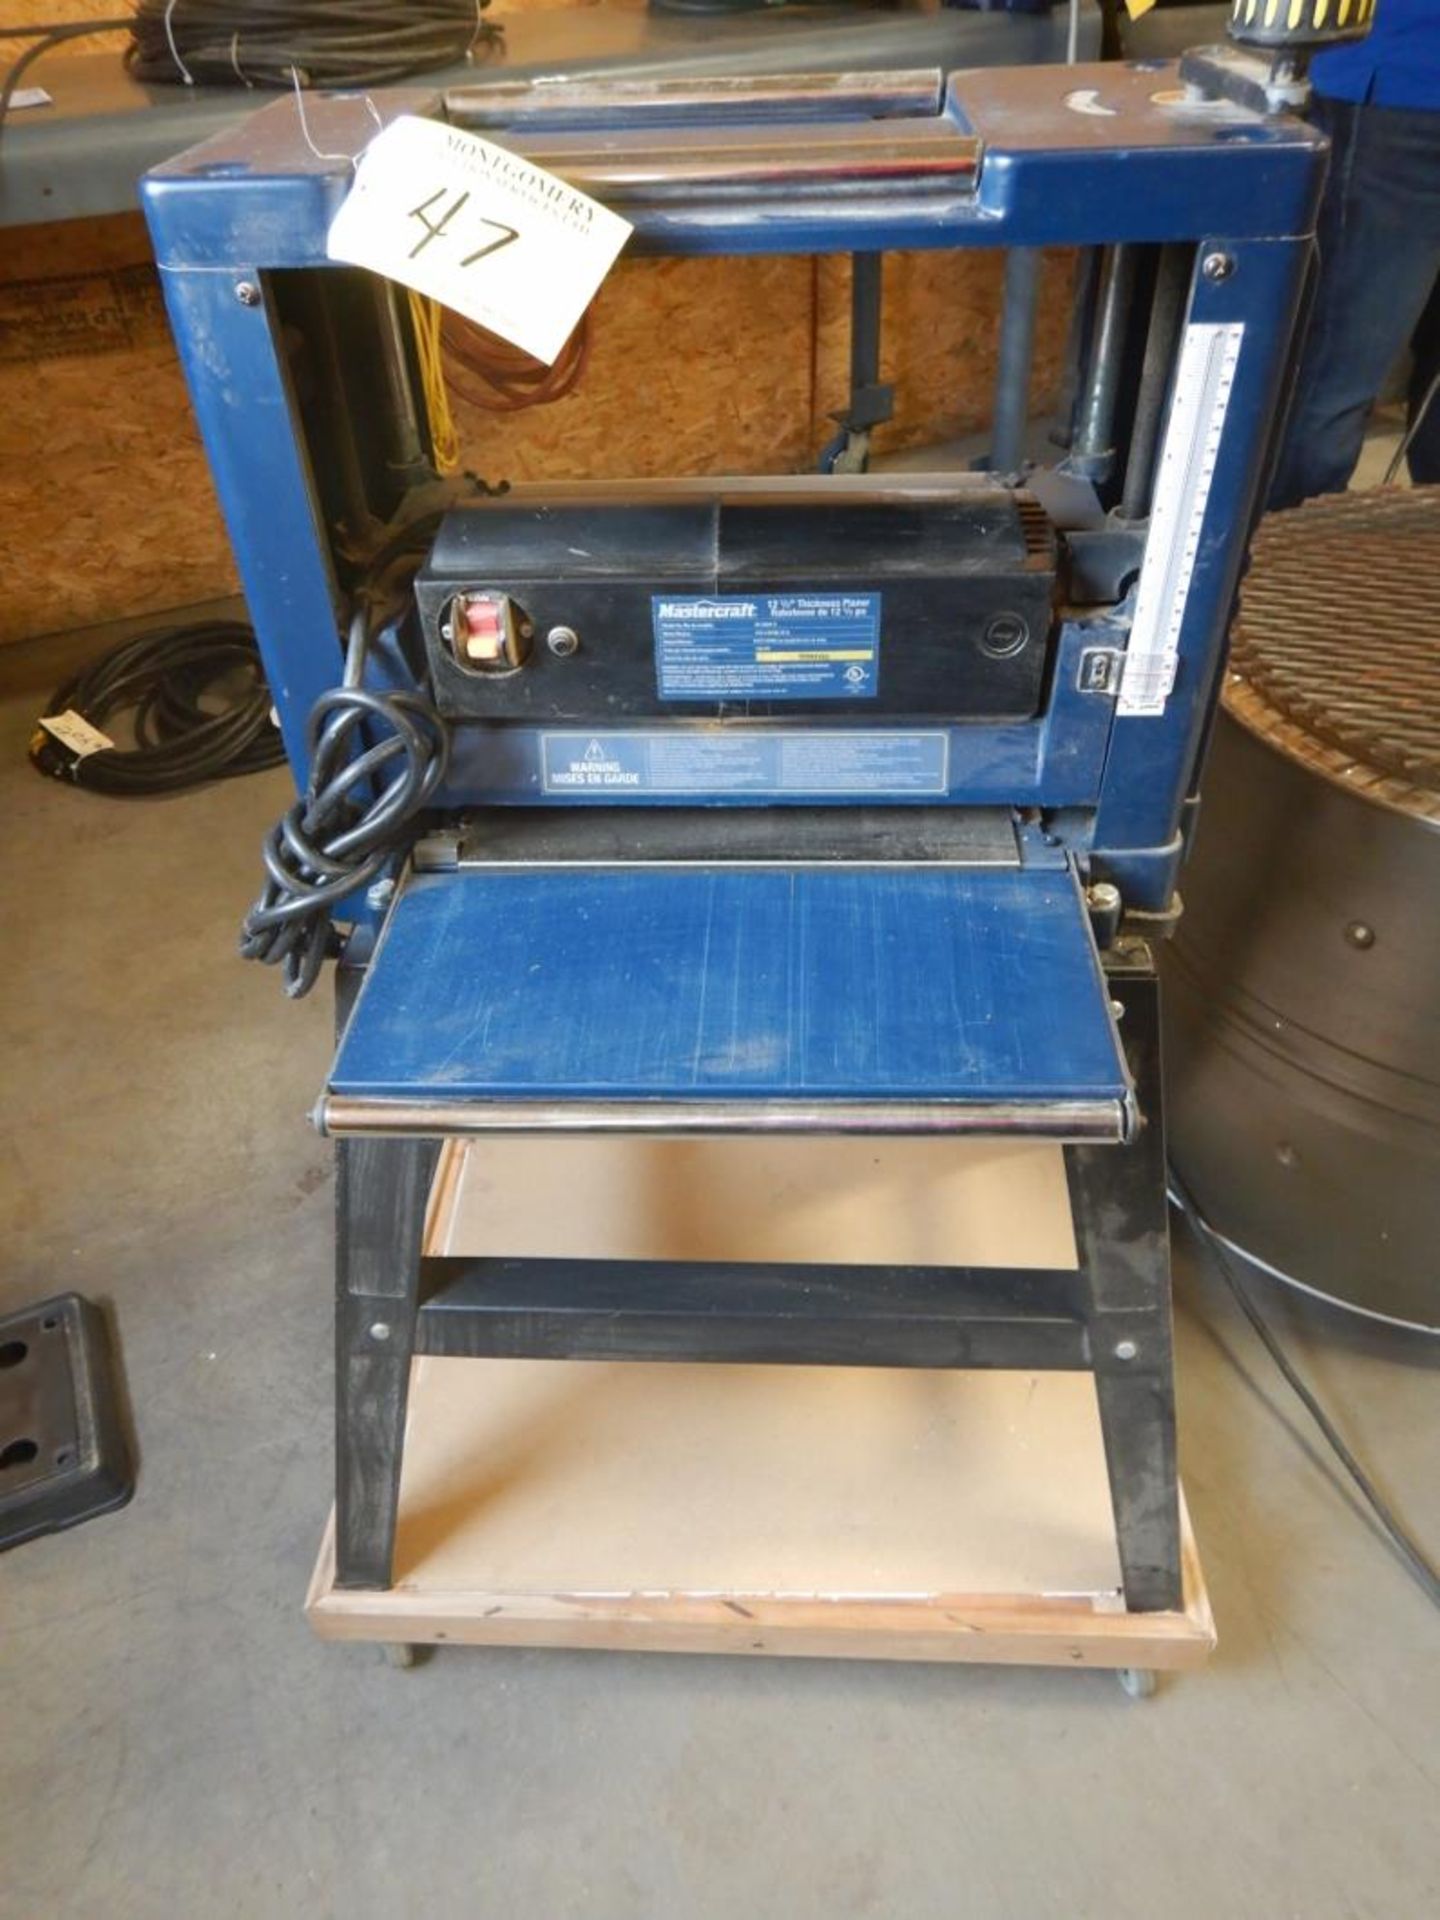 MASTERCRAFT 12.5IN THICKNESS PLANER ON STAND